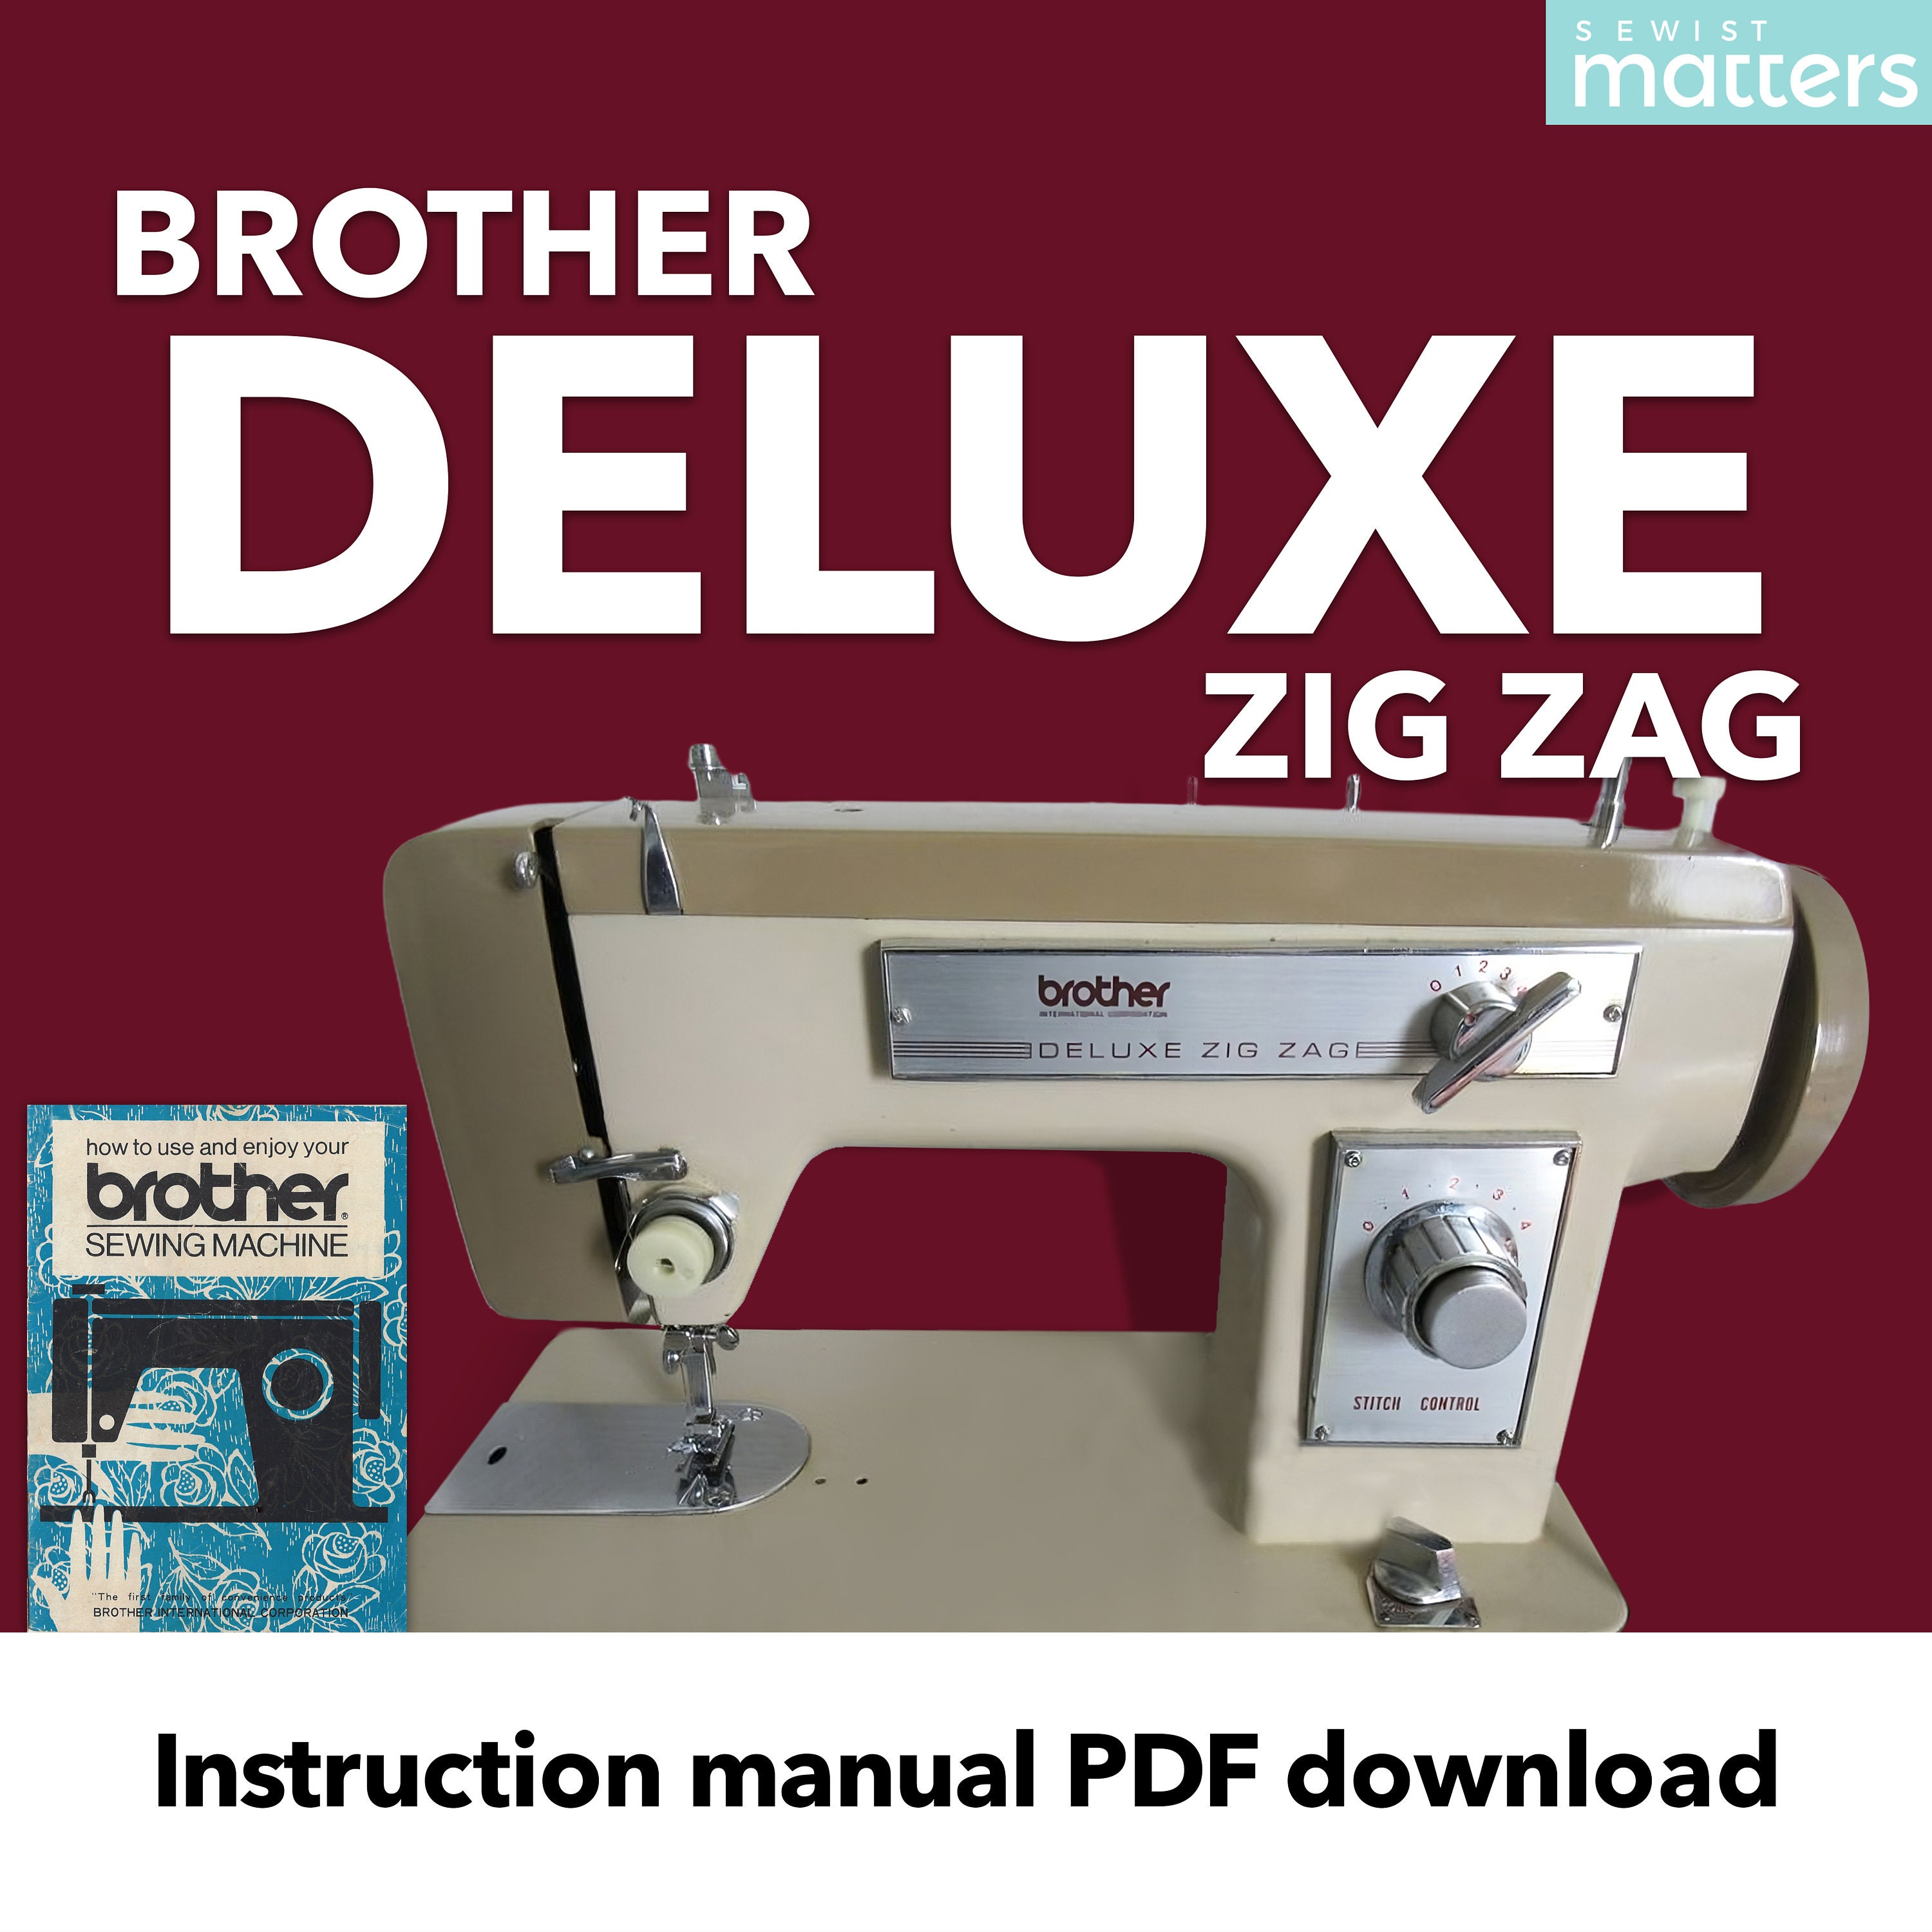 Brother Deluxe Zig zag Sewing Machine Manual PDF Download